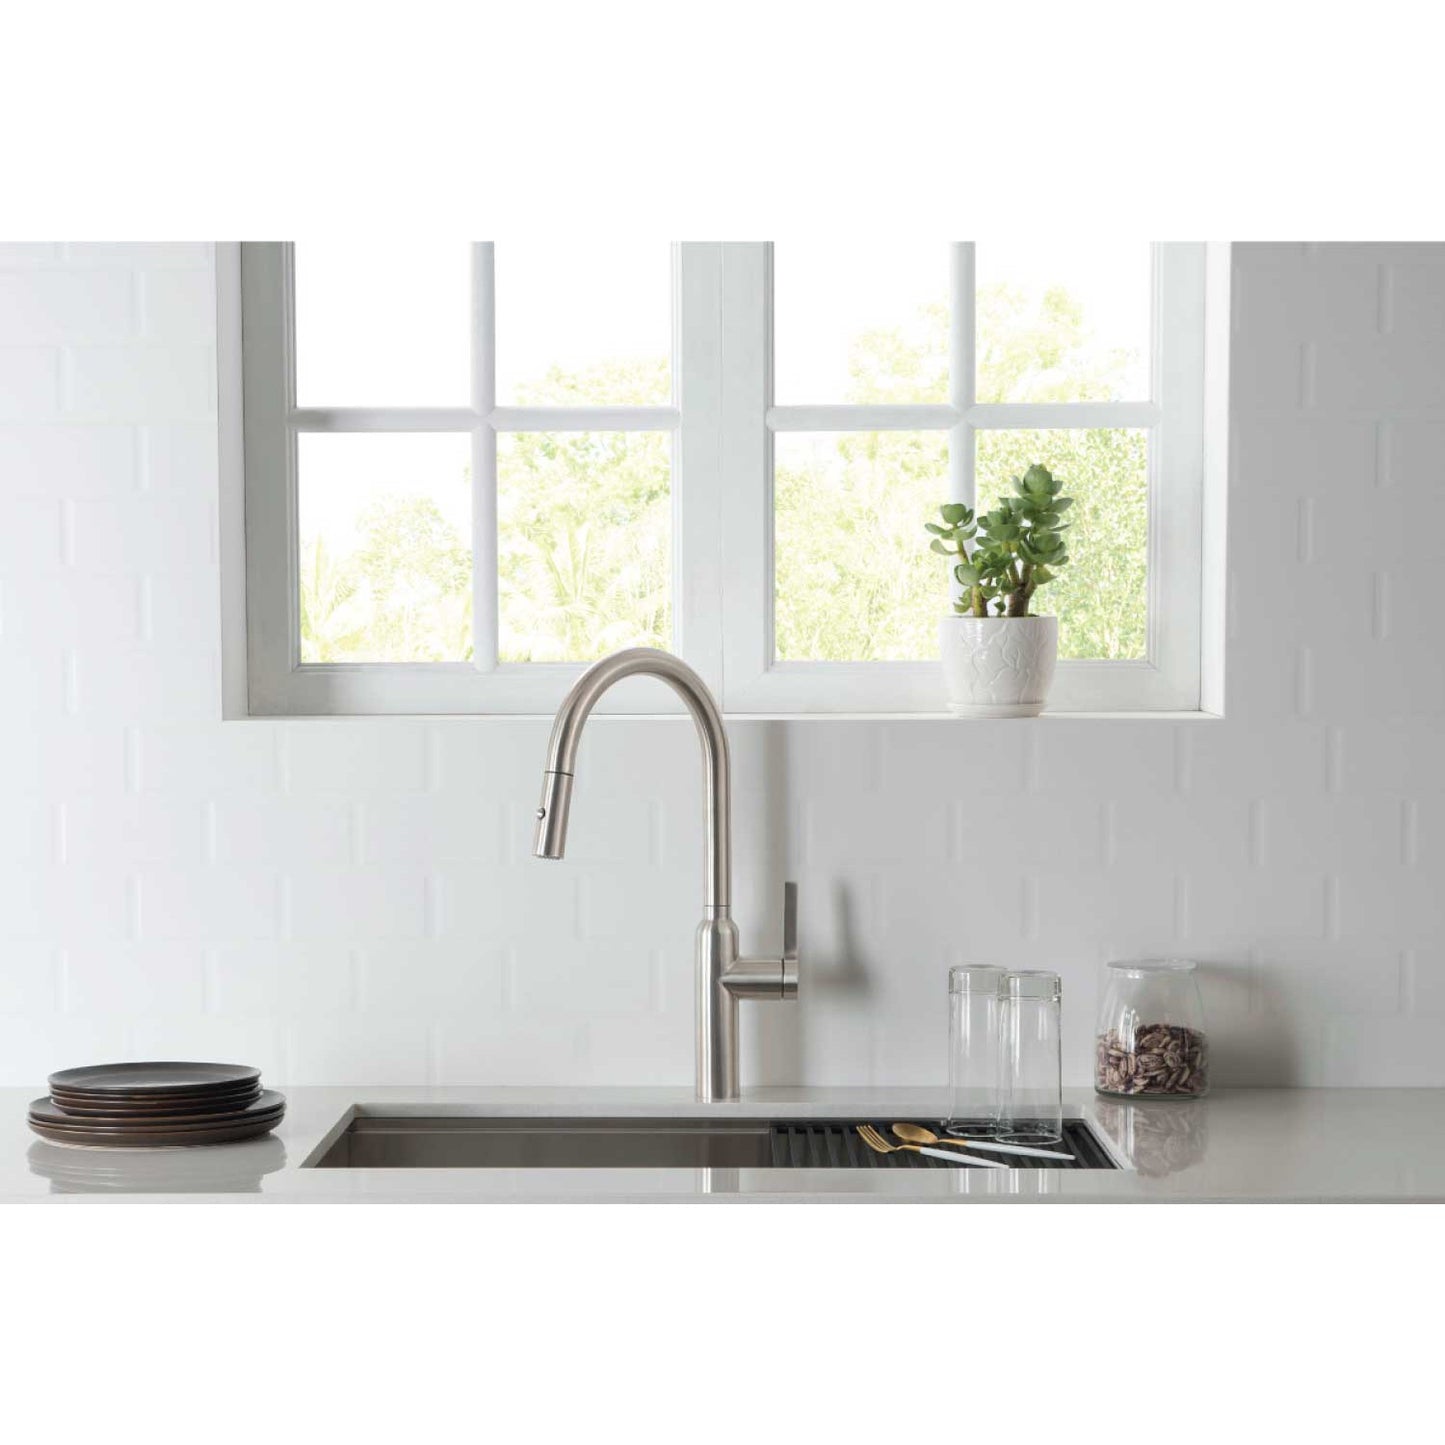 Isenberg Klassiker Ziel 17" Single Hole Navy Blue Stainless Steel Pull-Down Kitchen Faucet With Dual Function Sprayer